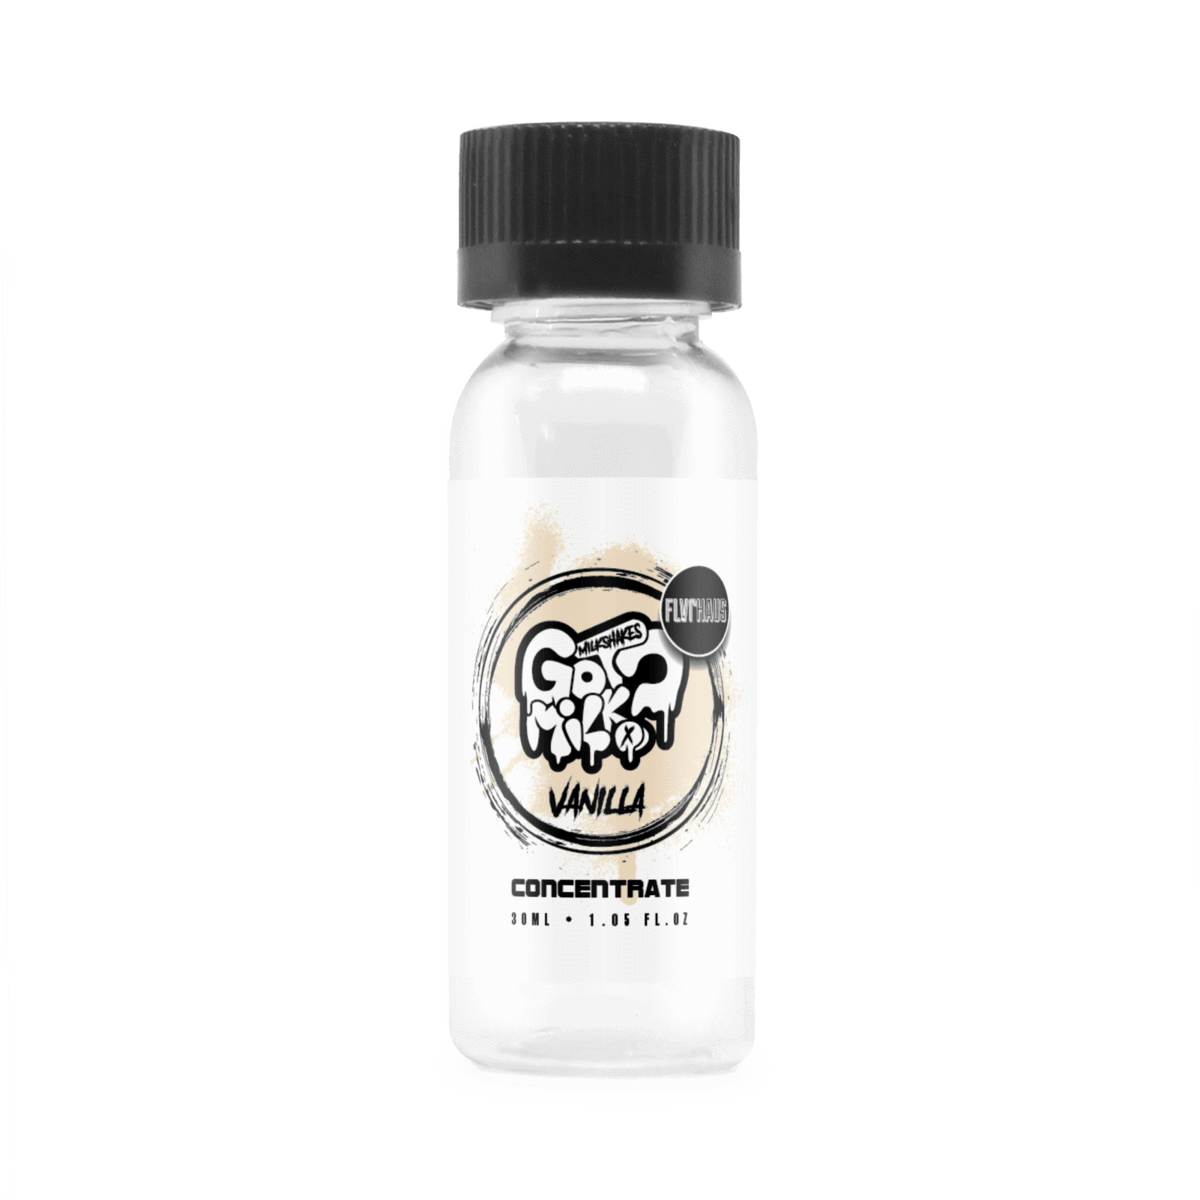 Vanilla Flavour Concentrate by Got Milk?